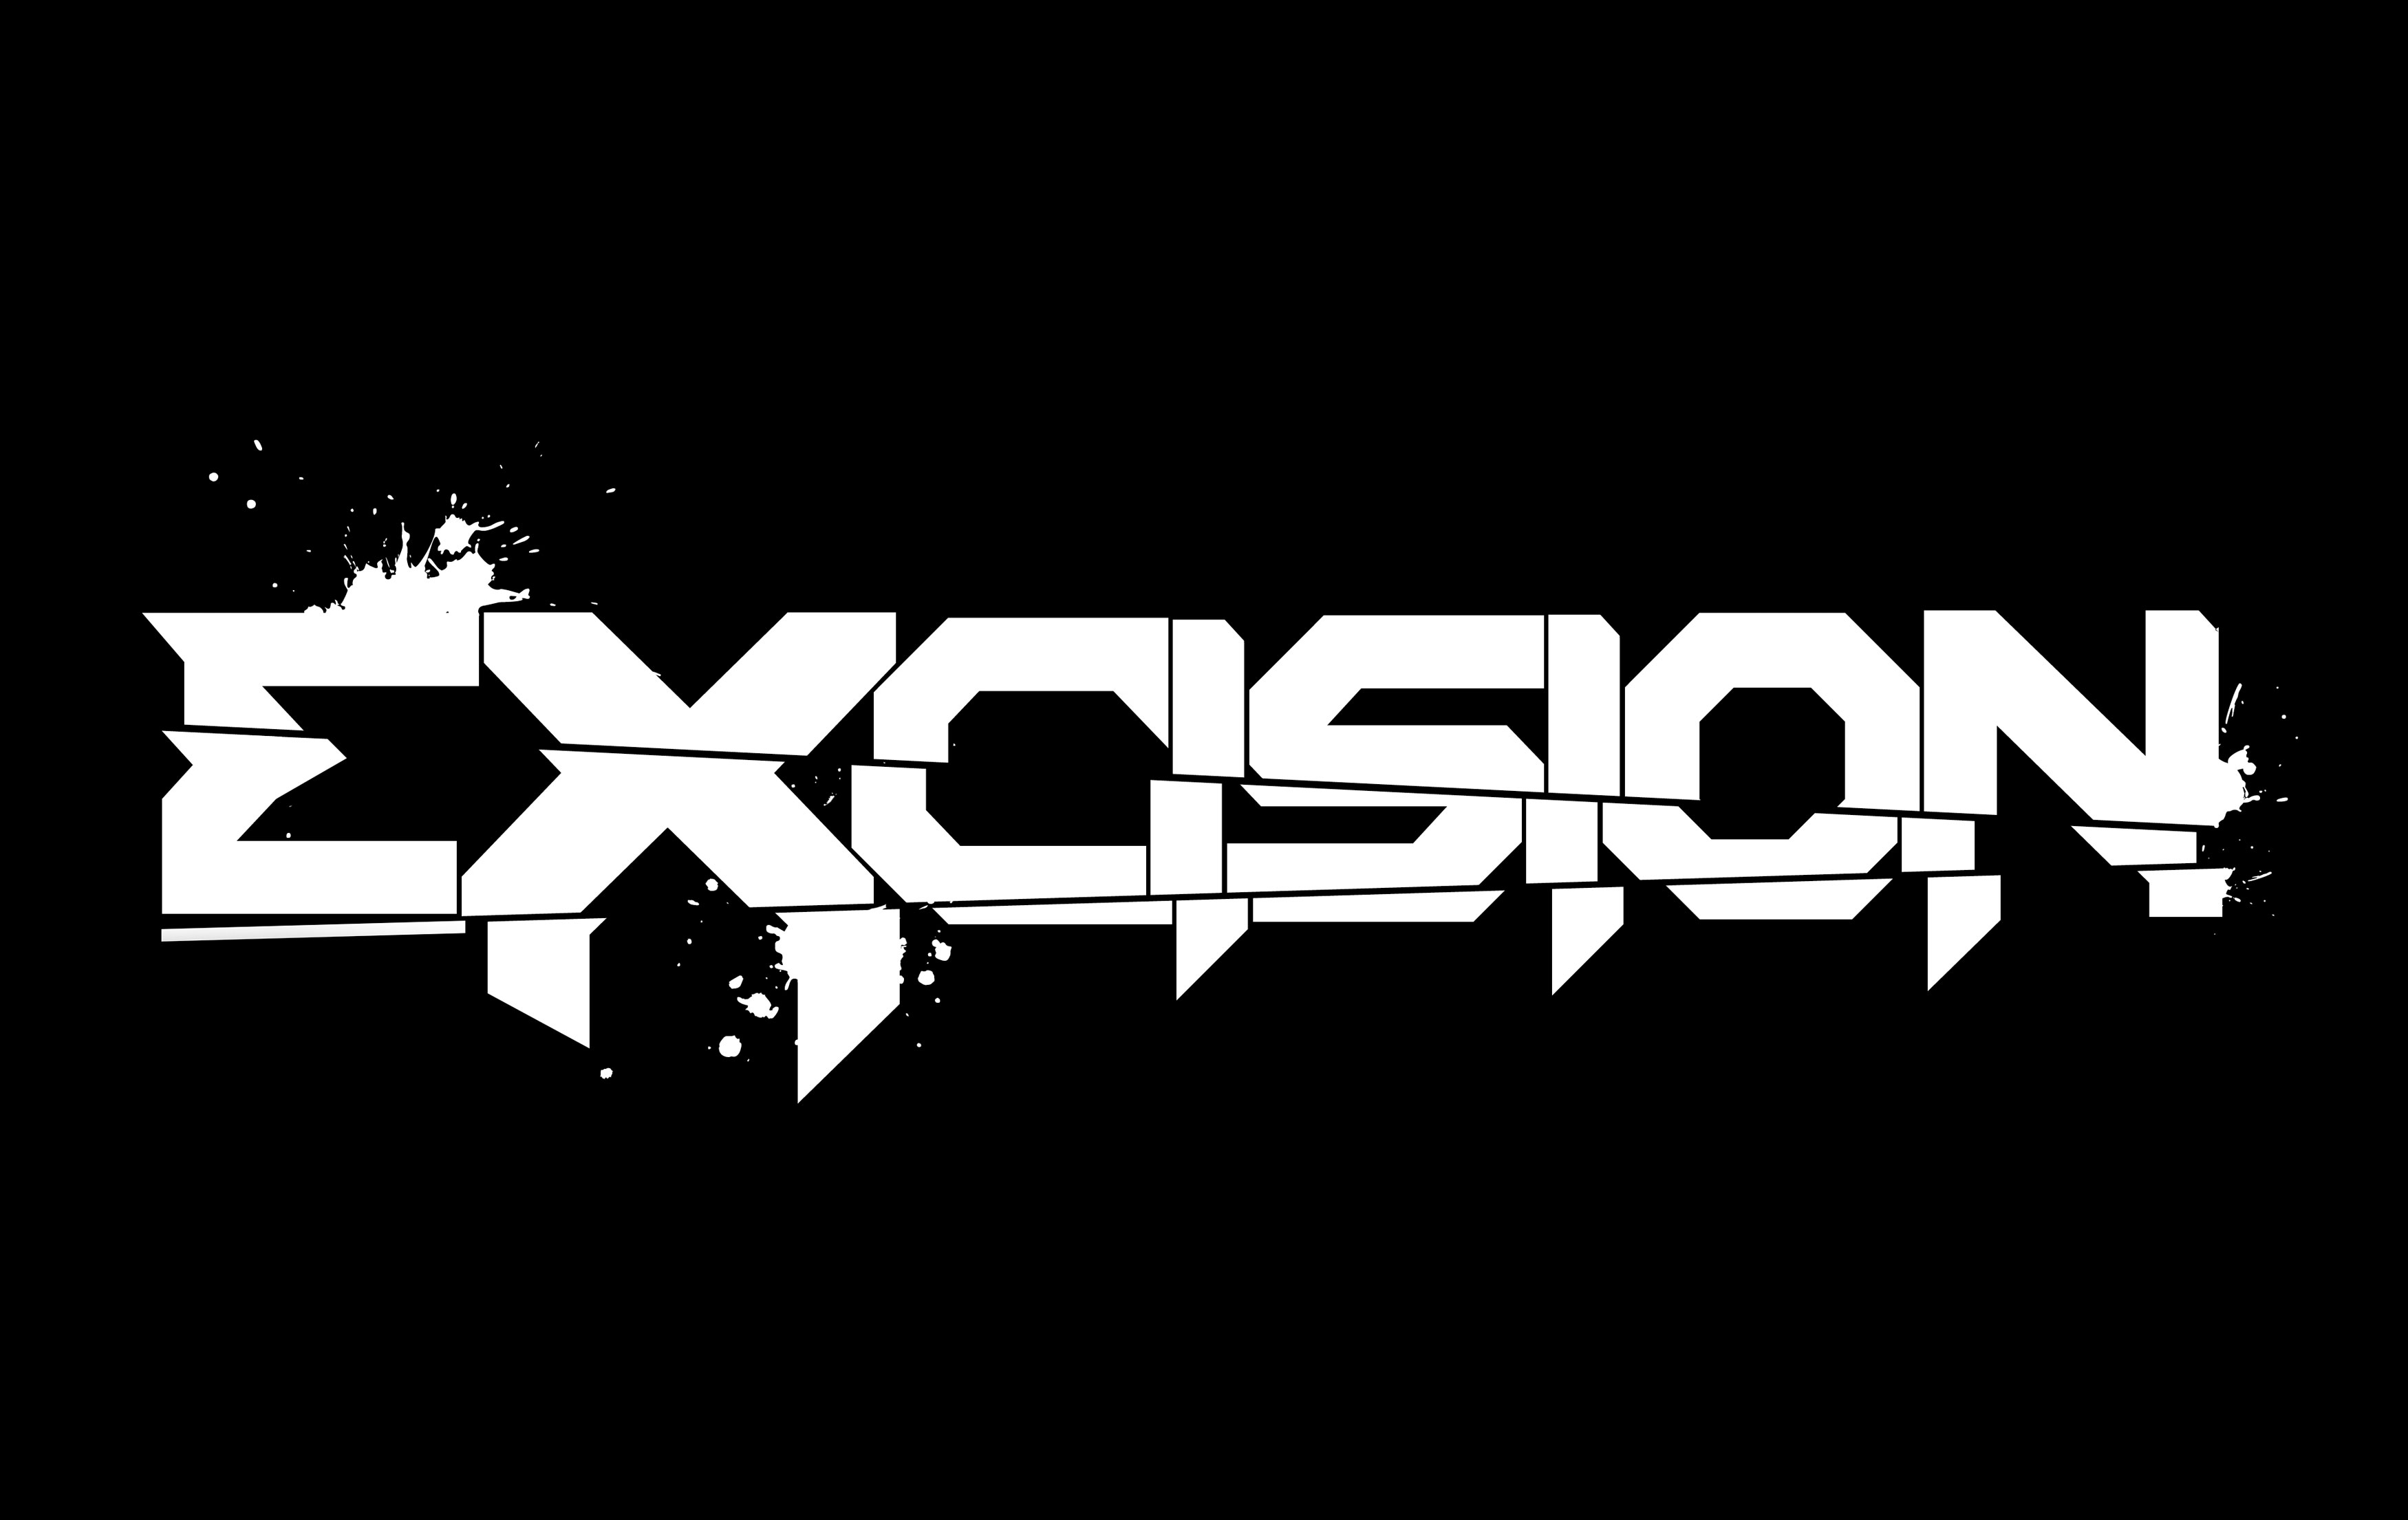 Excision #2